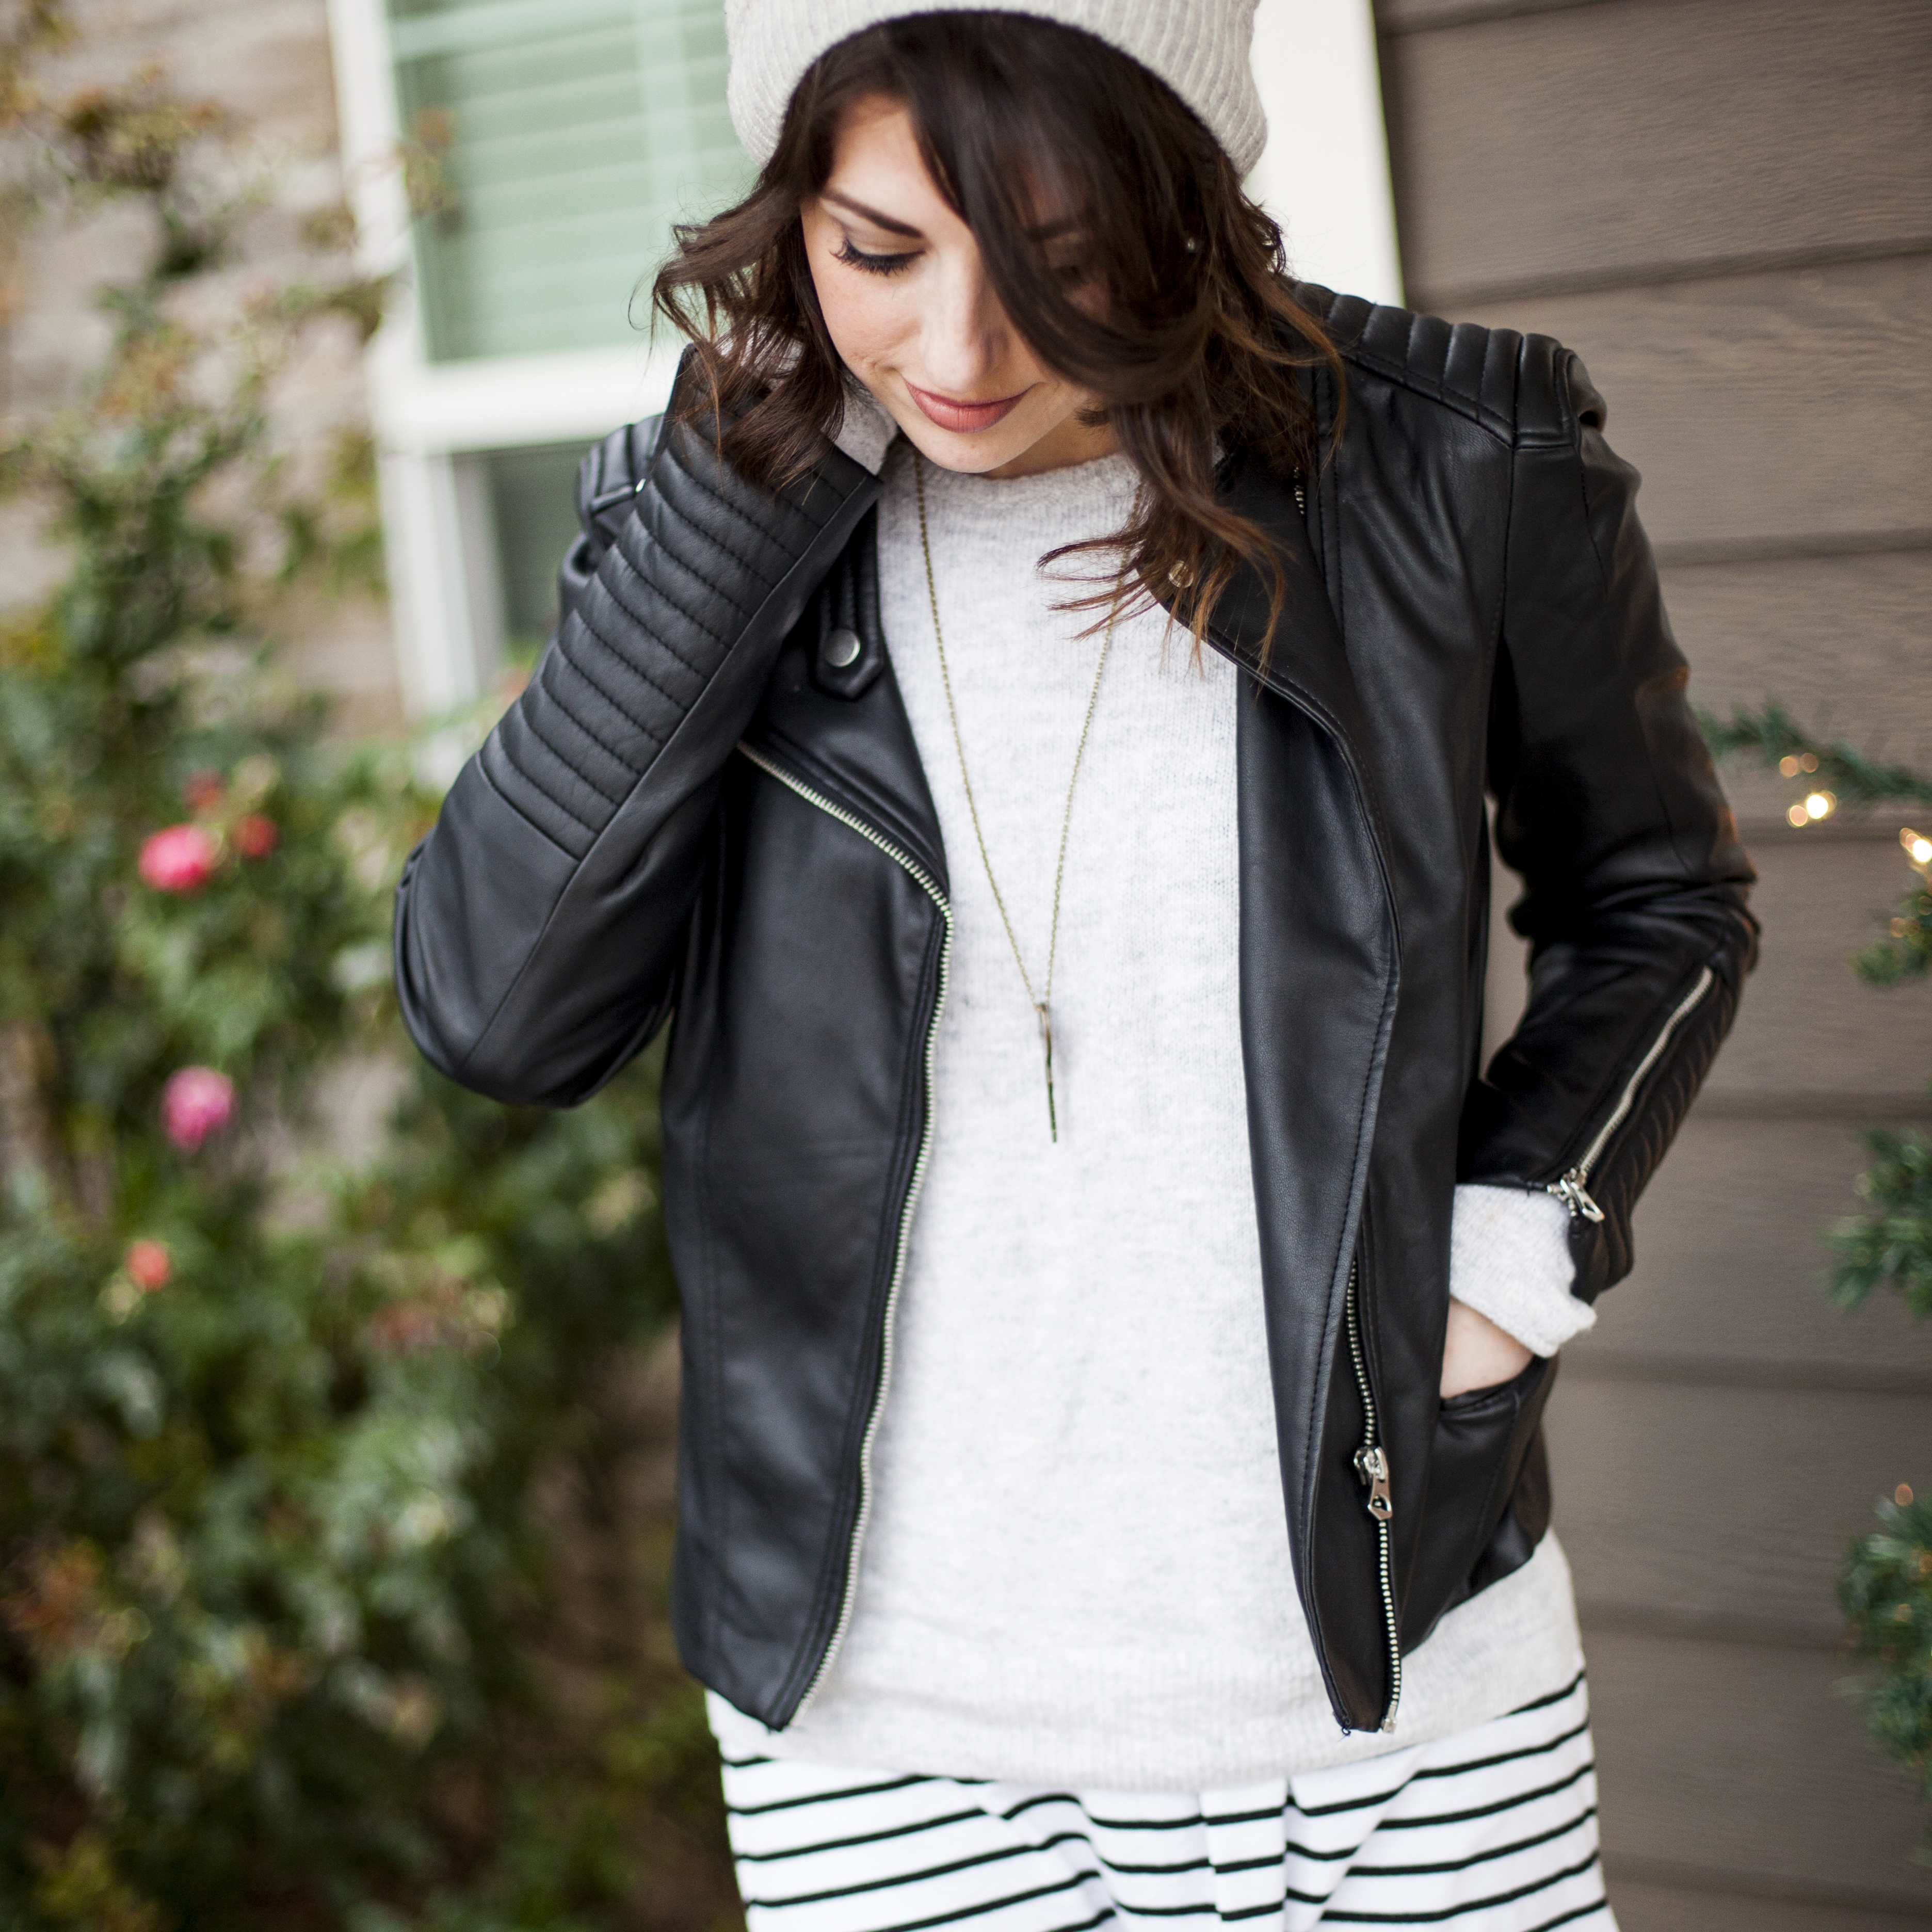 Modest Momma Style: Leather and Layers